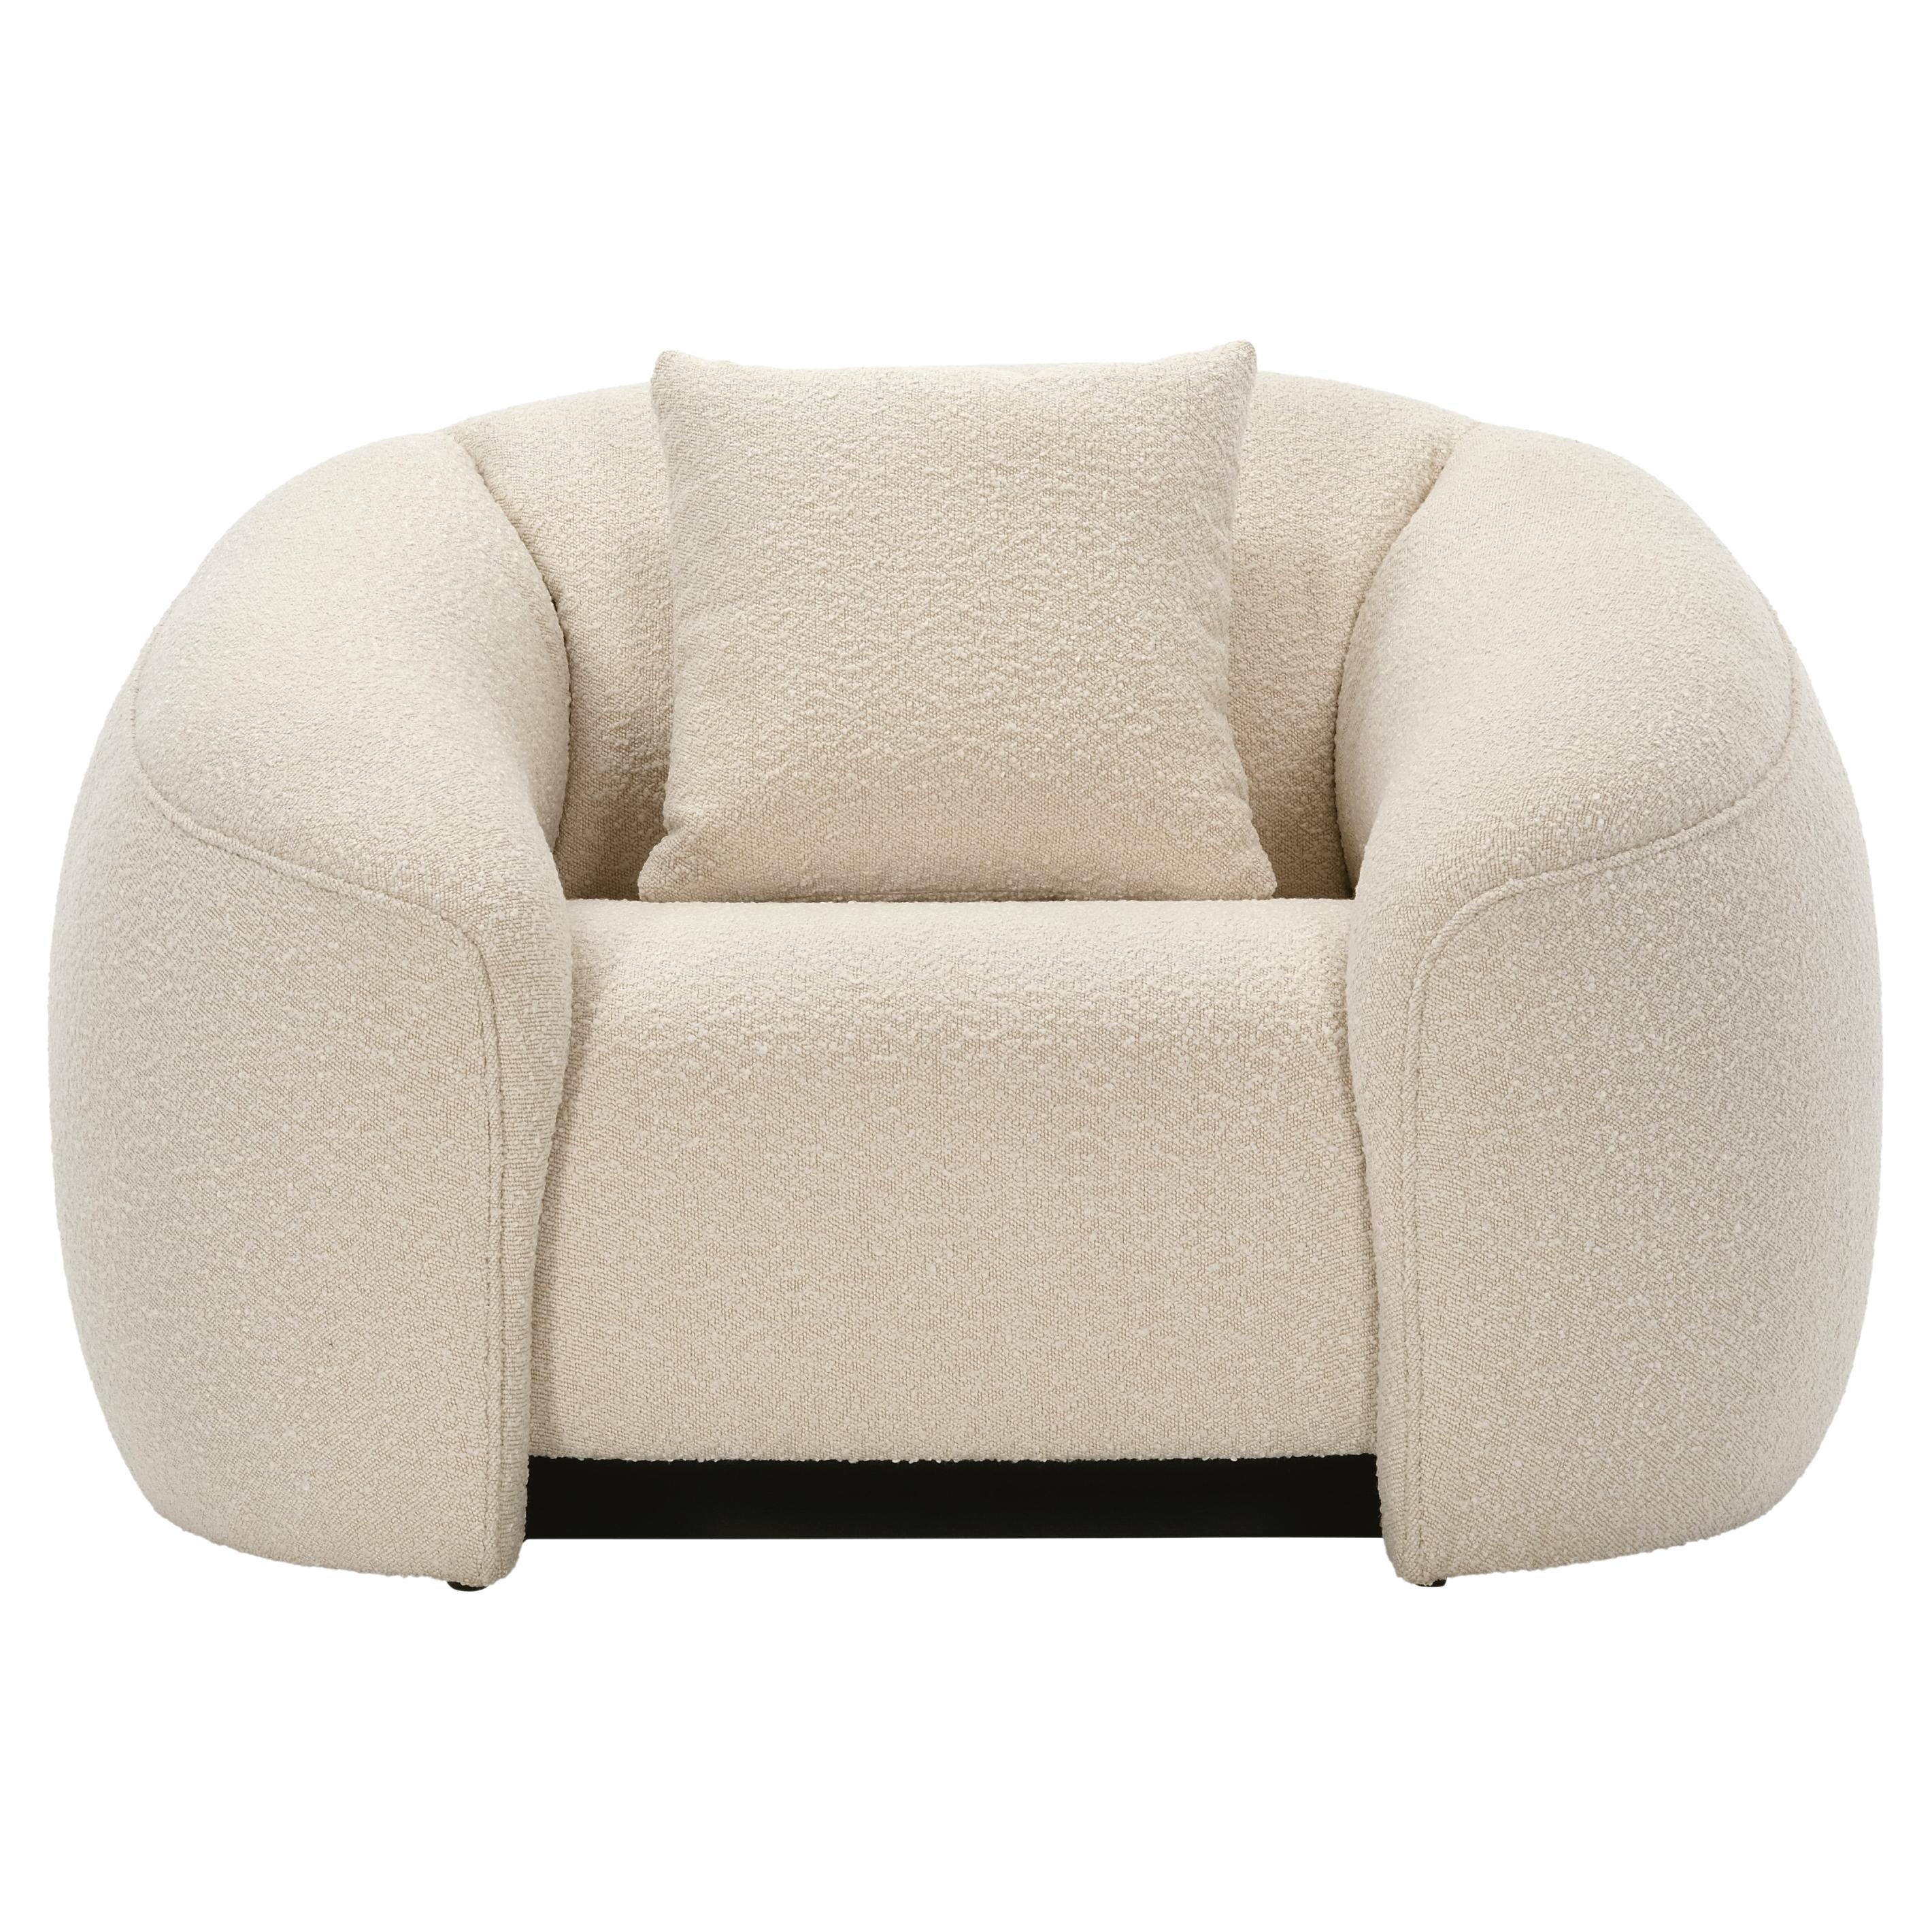 DEAN armchair in Boucle fabric For Sale